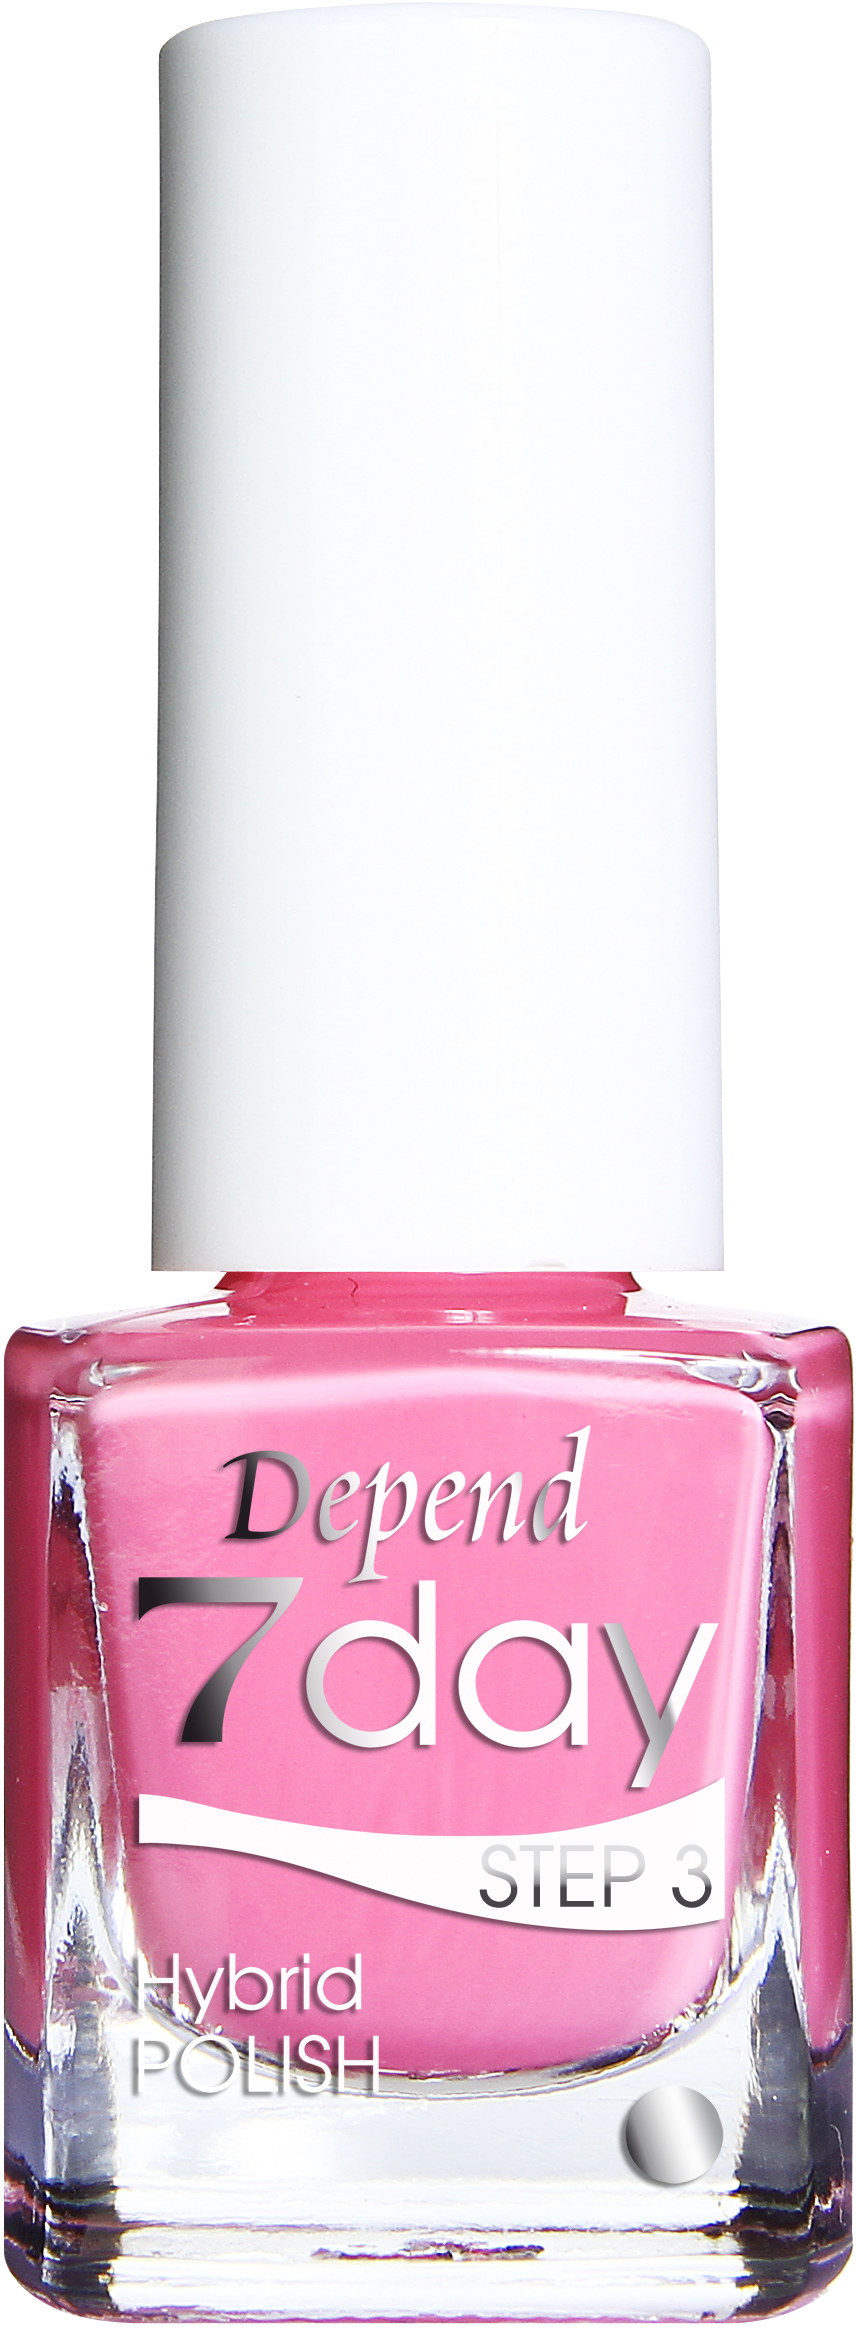 Depend 7Day Step 3 Nails Of The Day